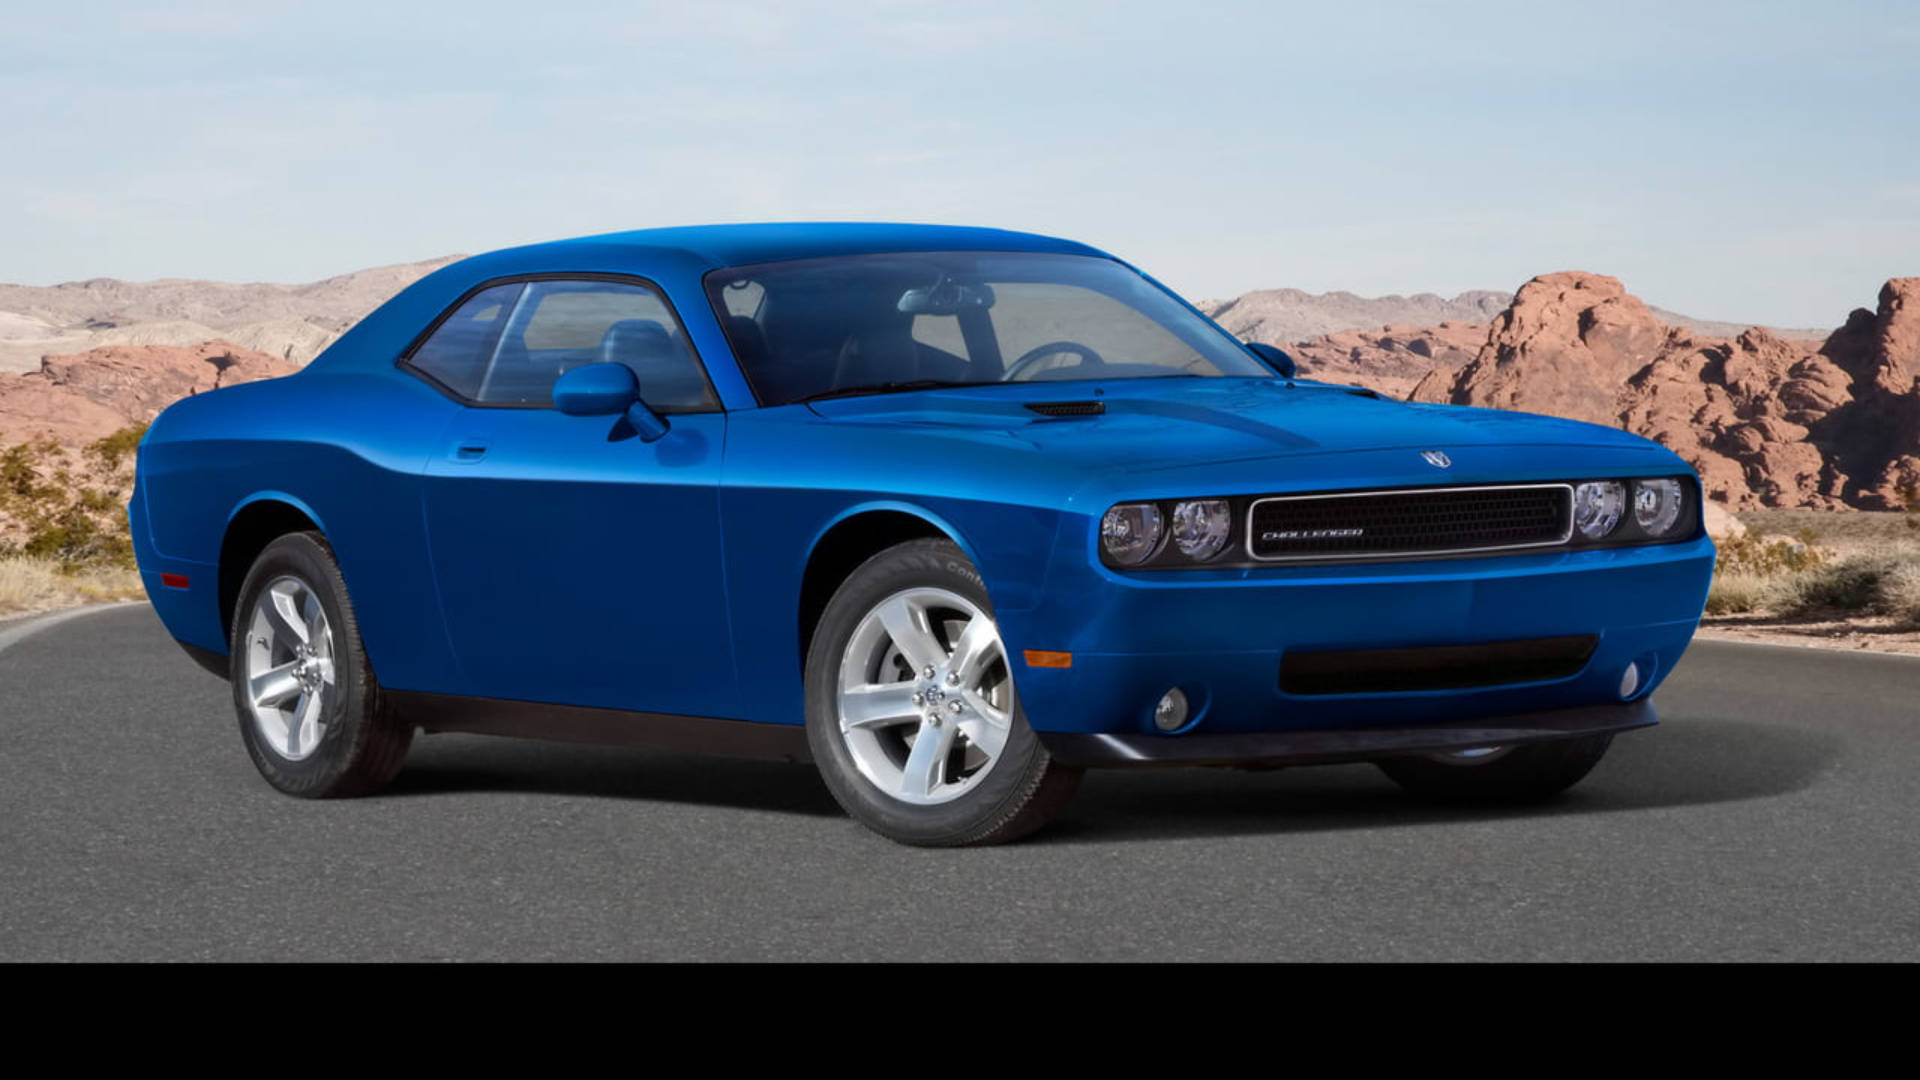 Powerful Blue Dodge Challenger in a Dynamic Pose Wallpaper